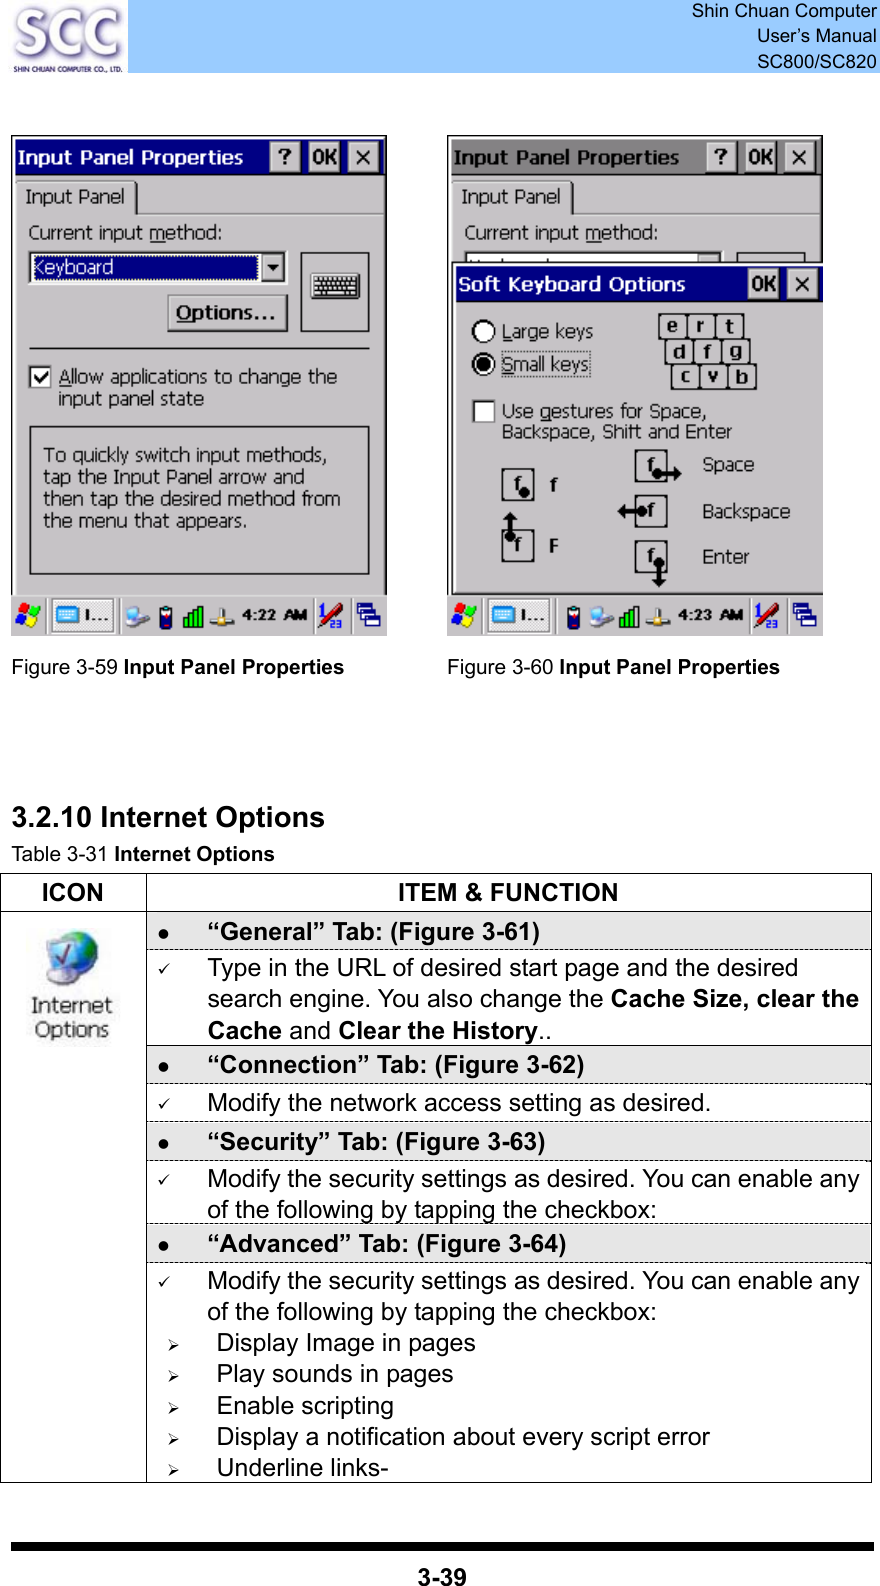  Shin Chuan Computer User’s Manual SC800/SC820  3-39     Figure 3-59 Input Panel Properties  Figure 3-60 Input Panel Properties    3.2.10 Internet Options Table 3-31 Internet Options ICON  ITEM &amp; FUNCTION z “General” Tab: (Figure 3-61) 9 Type in the URL of desired start page and the desired search engine. You also change the Cache Size, clear the Cache and Clear the History.. z “Connection” Tab: (Figure 3-62) 9 Modify the network access setting as desired. z “Security” Tab: (Figure 3-63) 9 Modify the security settings as desired. You can enable any of the following by tapping the checkbox: z “Advanced” Tab: (Figure 3-64)  9 Modify the security settings as desired. You can enable any of the following by tapping the checkbox: ¾ Display Image in pages ¾ Play sounds in pages ¾ Enable scripting ¾ Display a notification about every script error ¾ Underline links- 